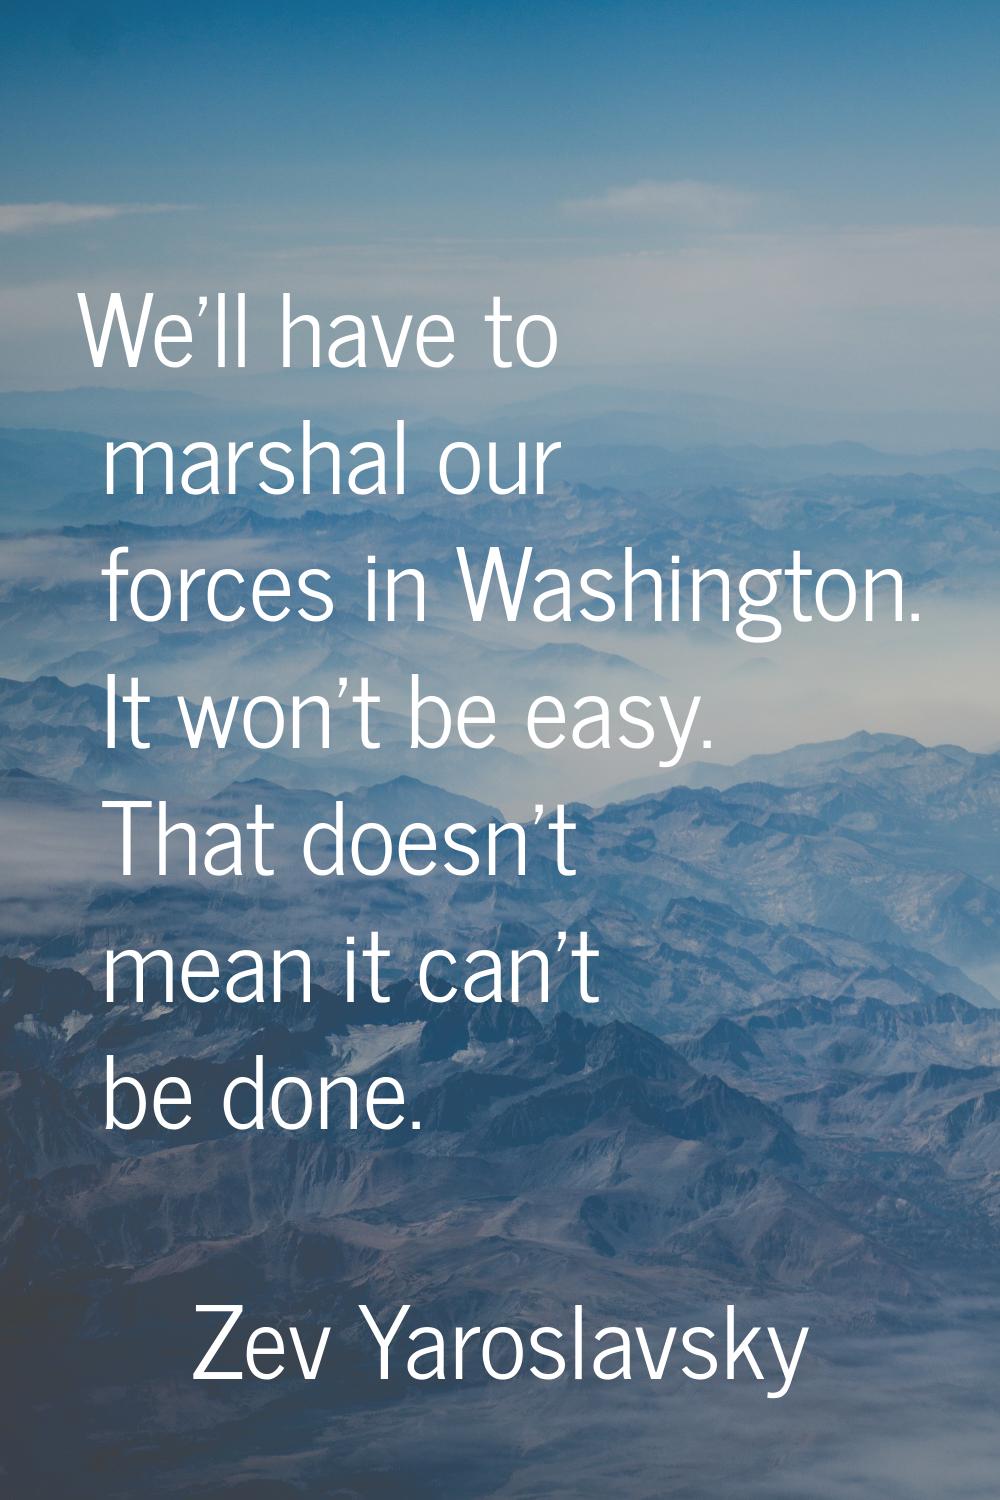 We'll have to marshal our forces in Washington. It won't be easy. That doesn't mean it can't be don